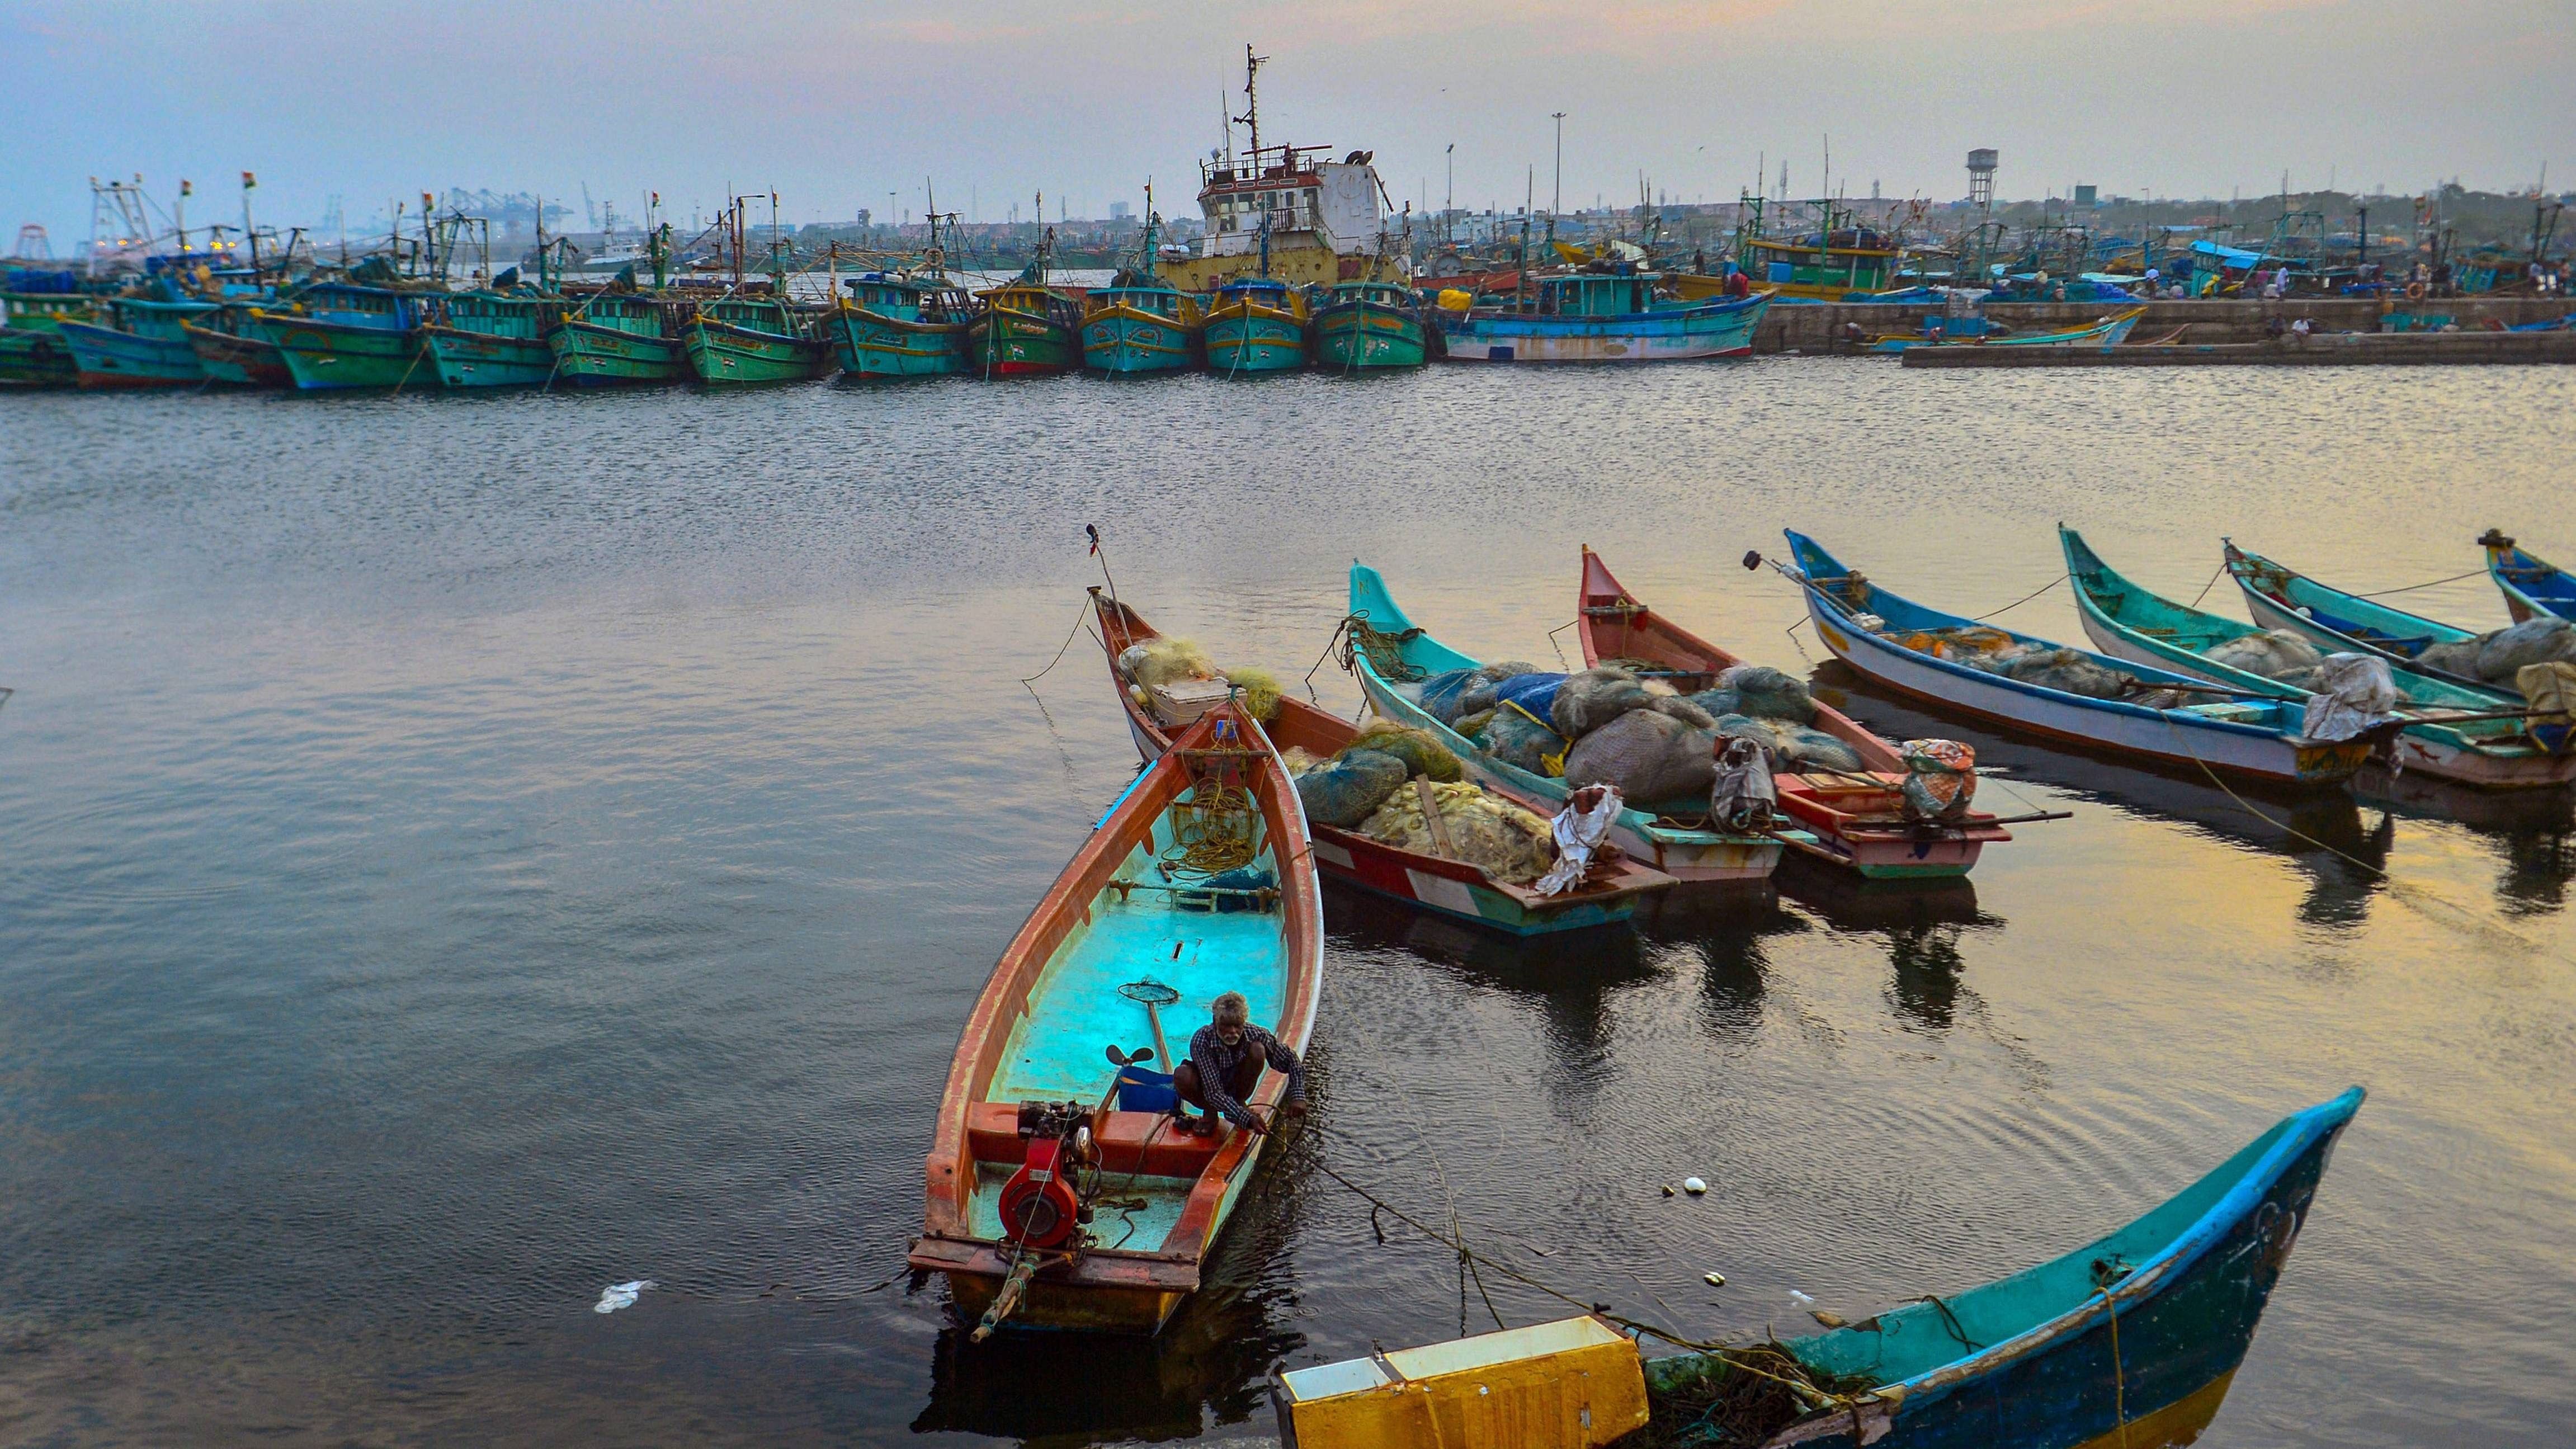 The Narendra Modi government is mulling restoring the traditional rights of Tamil Nadu fishermen in Katchatheevu, an uninhabited island of 285 acres sandwiched between India and Sri Lanka in the Palk Bay. Credit: PTI File Photo